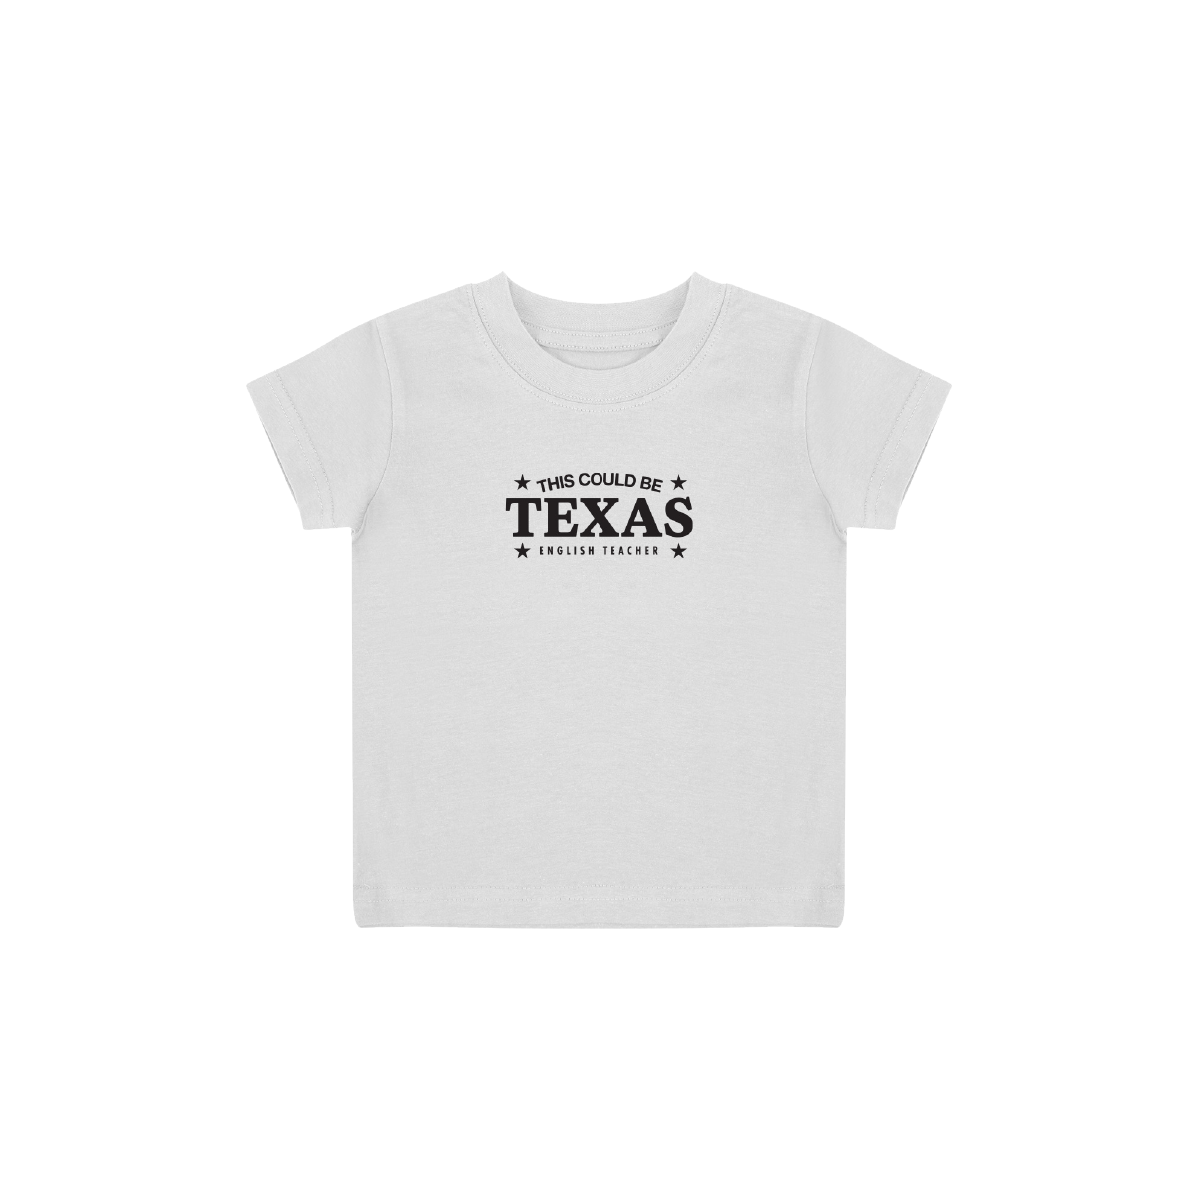 English Teacher - This Could Be Texas White Baby T-shirt